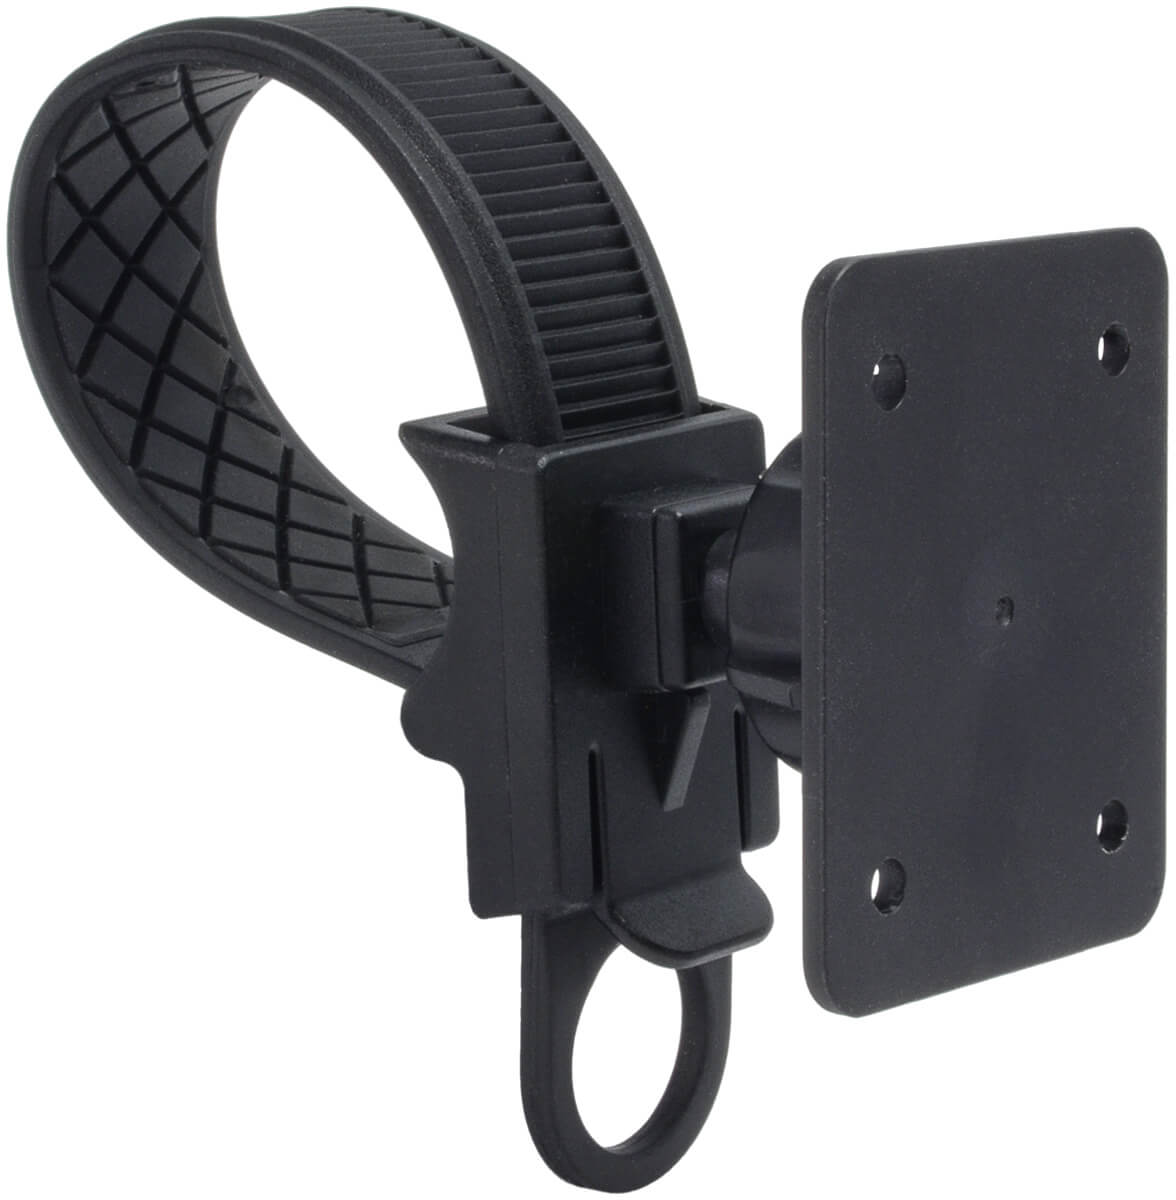 strap mount for motorcycle handlebars